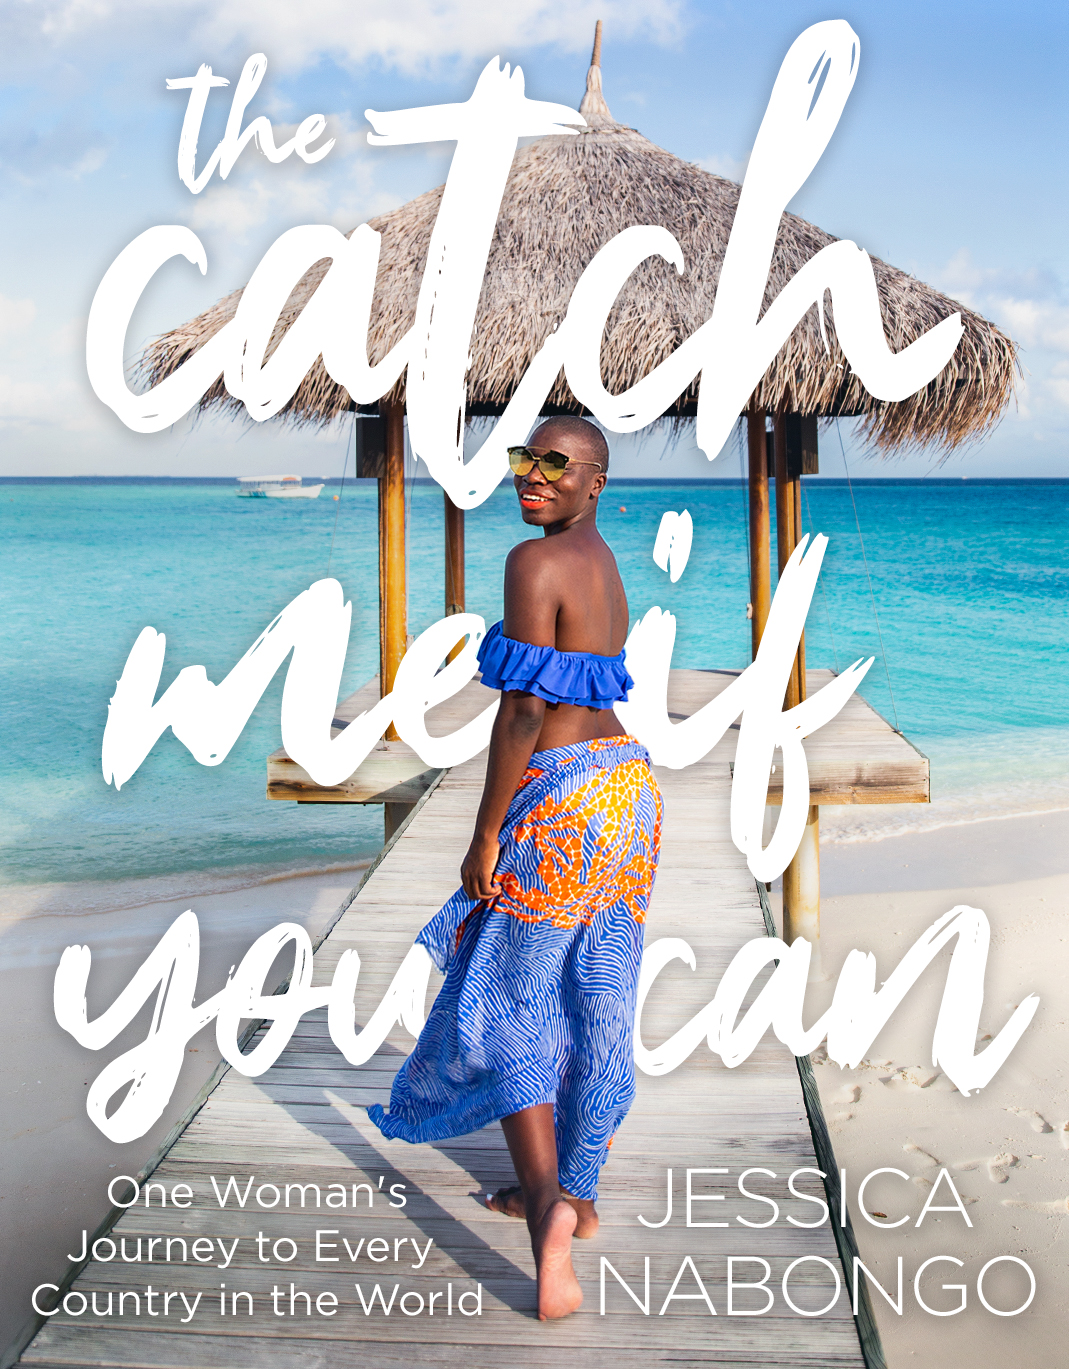 Jessica Nabongo and Her ‘Catch Me If You Can’ Travelogue > CULTURS — lifestyle media for cross-cultural identity